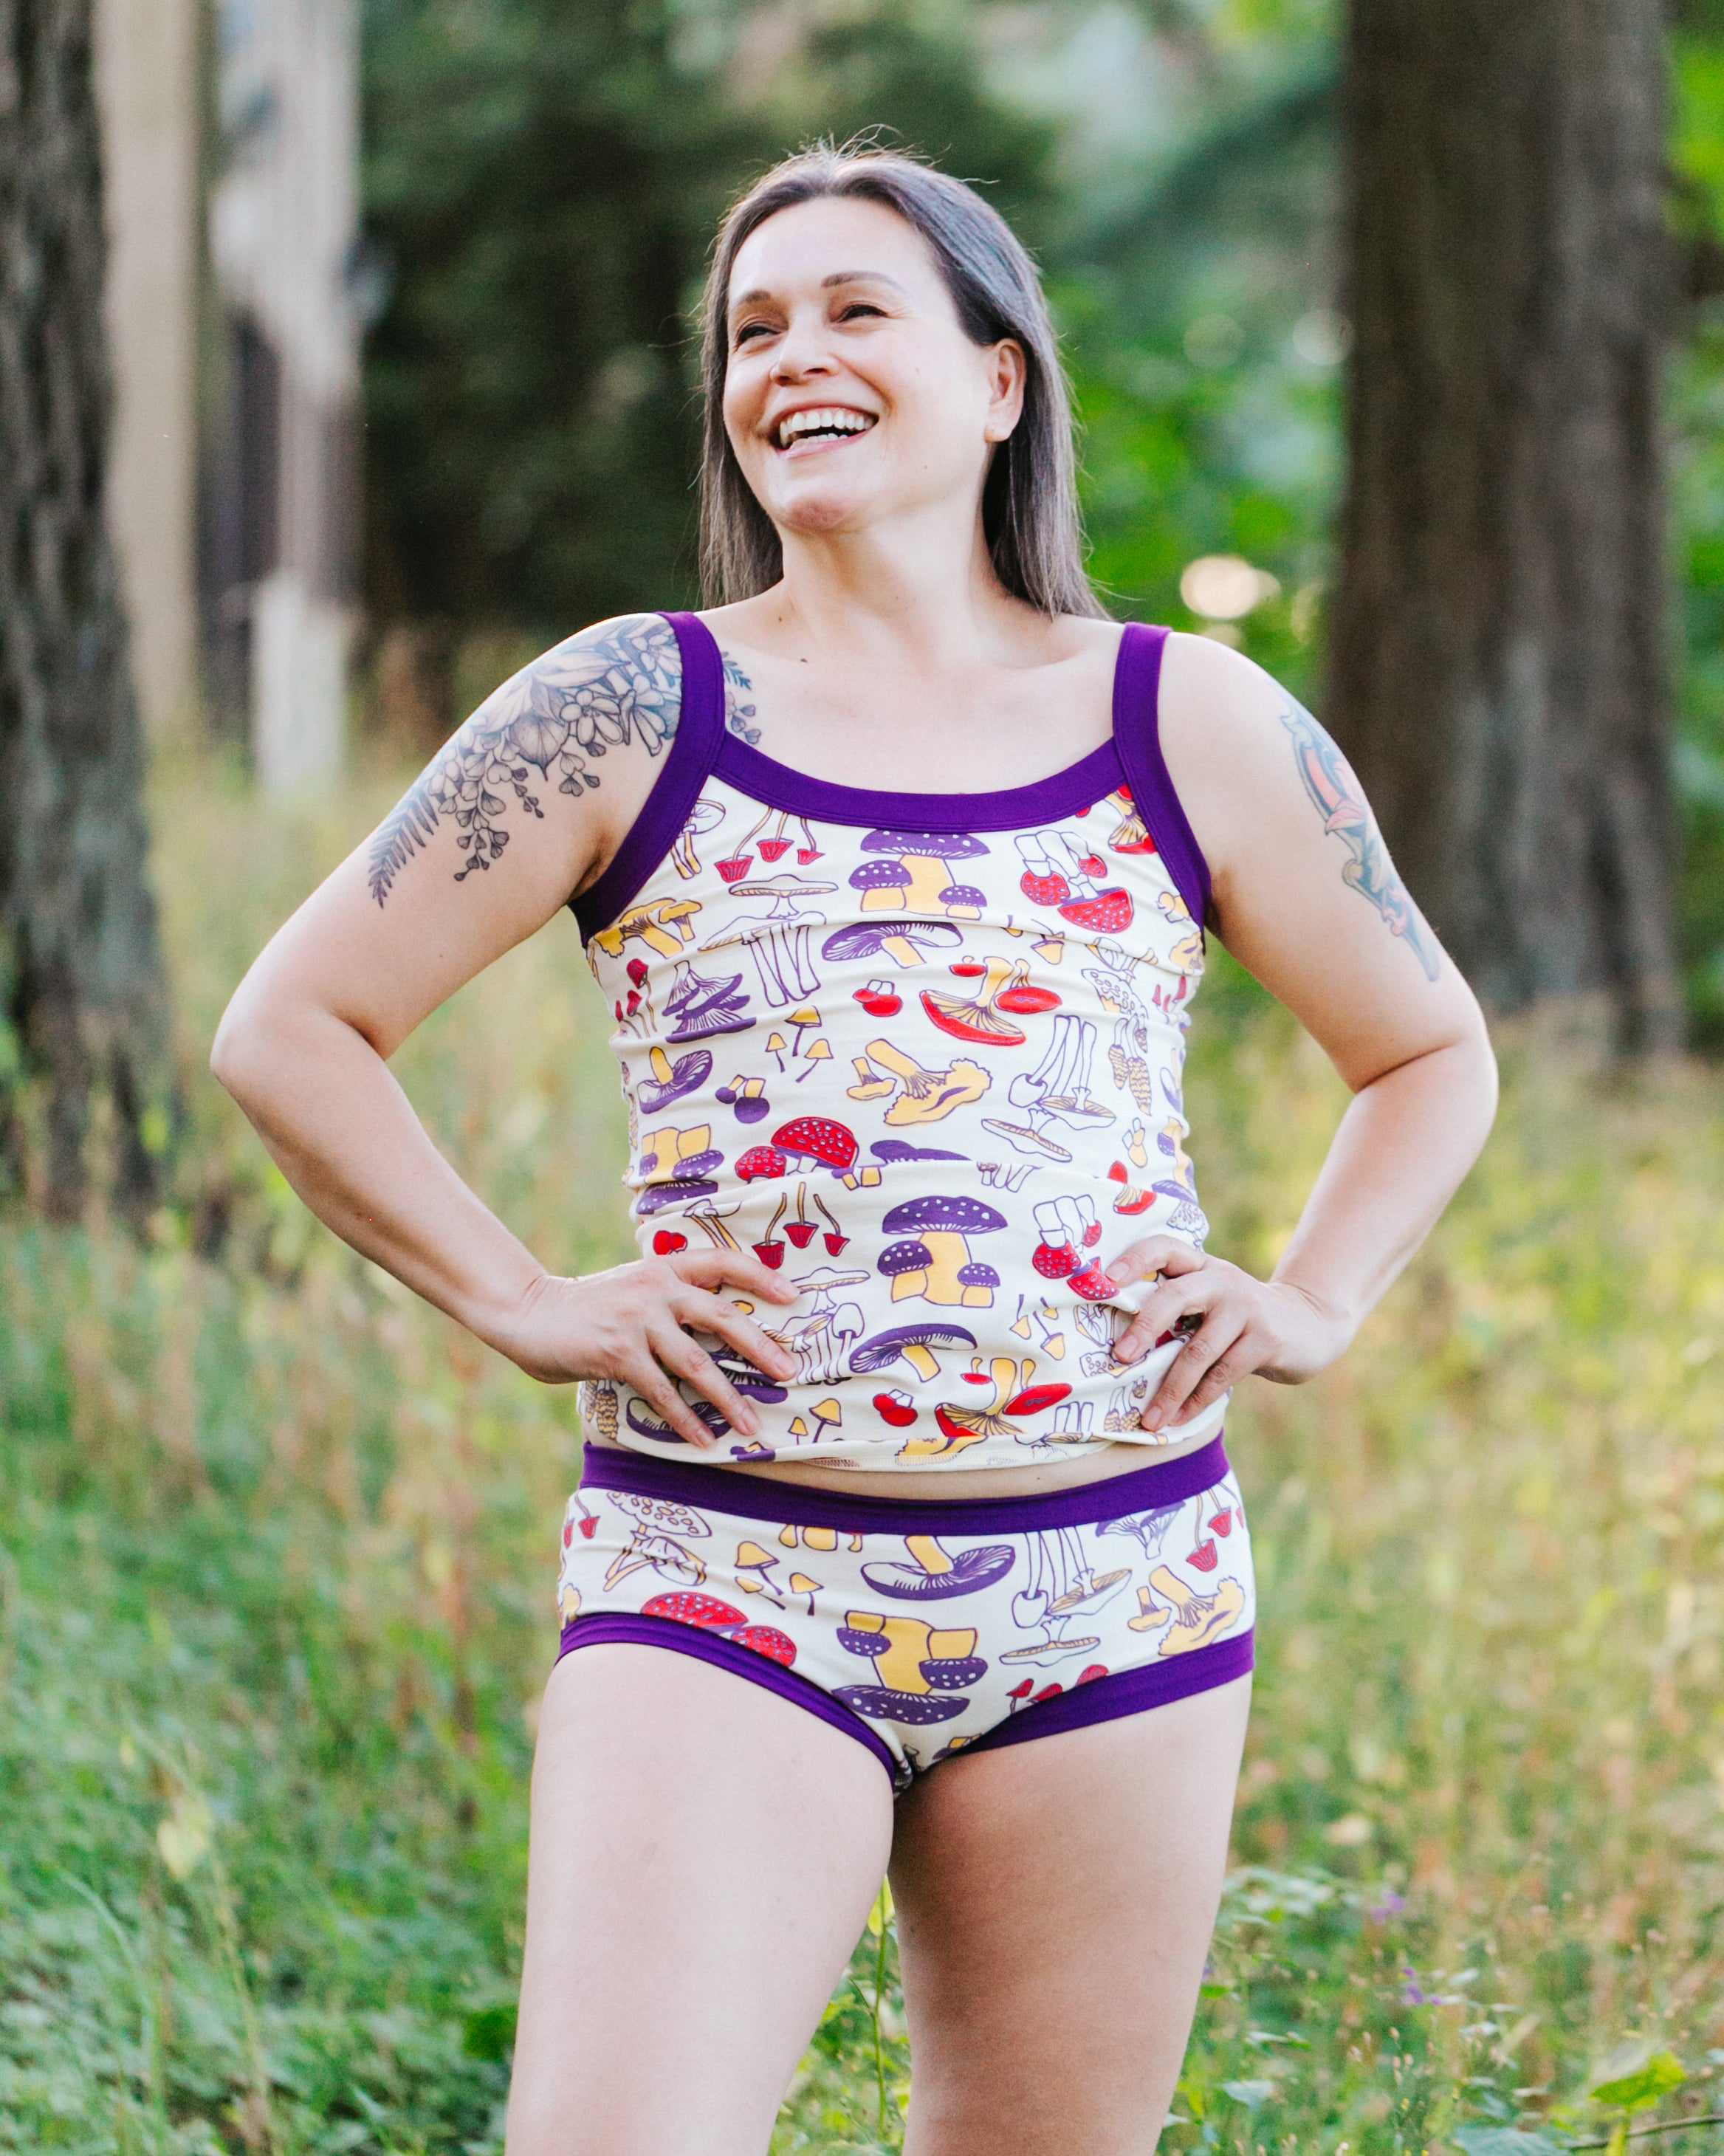 Model smiling in the forest wearing a set of Hipster style underwear and Camisole in Mushroom Magic print: different kinds of mushrooms in yellow, red, and purple colors with dark purple binding.